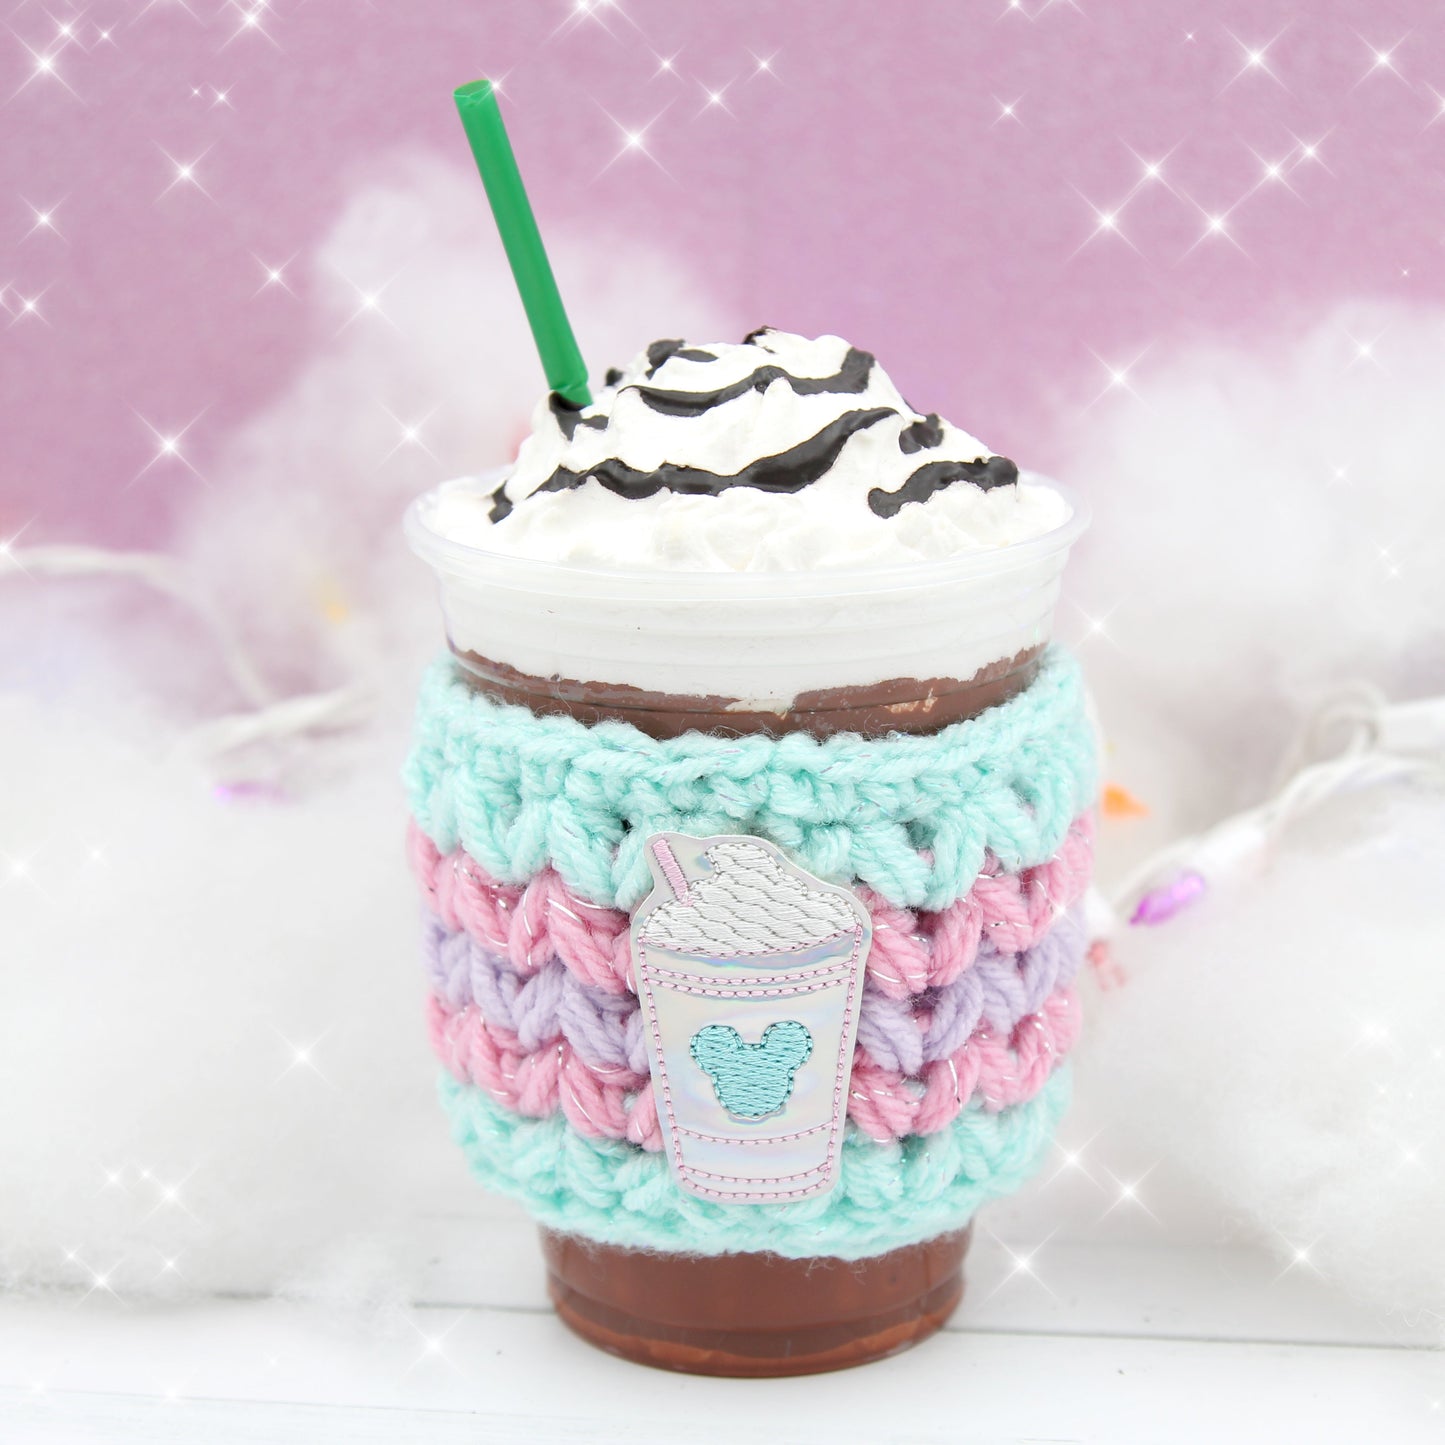 Holographic Magical Drink Crochet Coffee Cup Cozie Sleeve